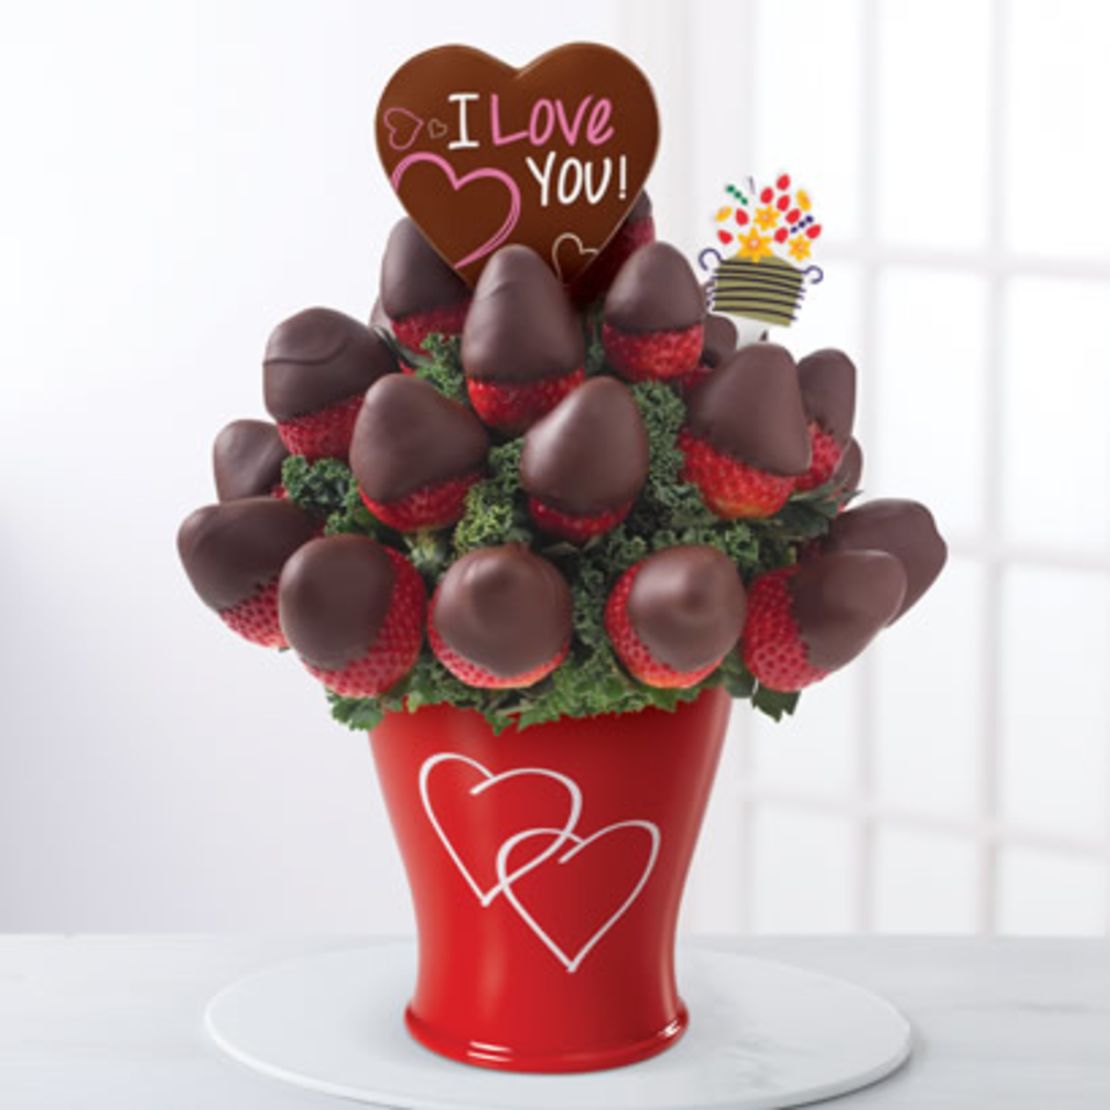 The I Love You Chocolate Dipped Strawberries Bouquet from Edible Arrangements.